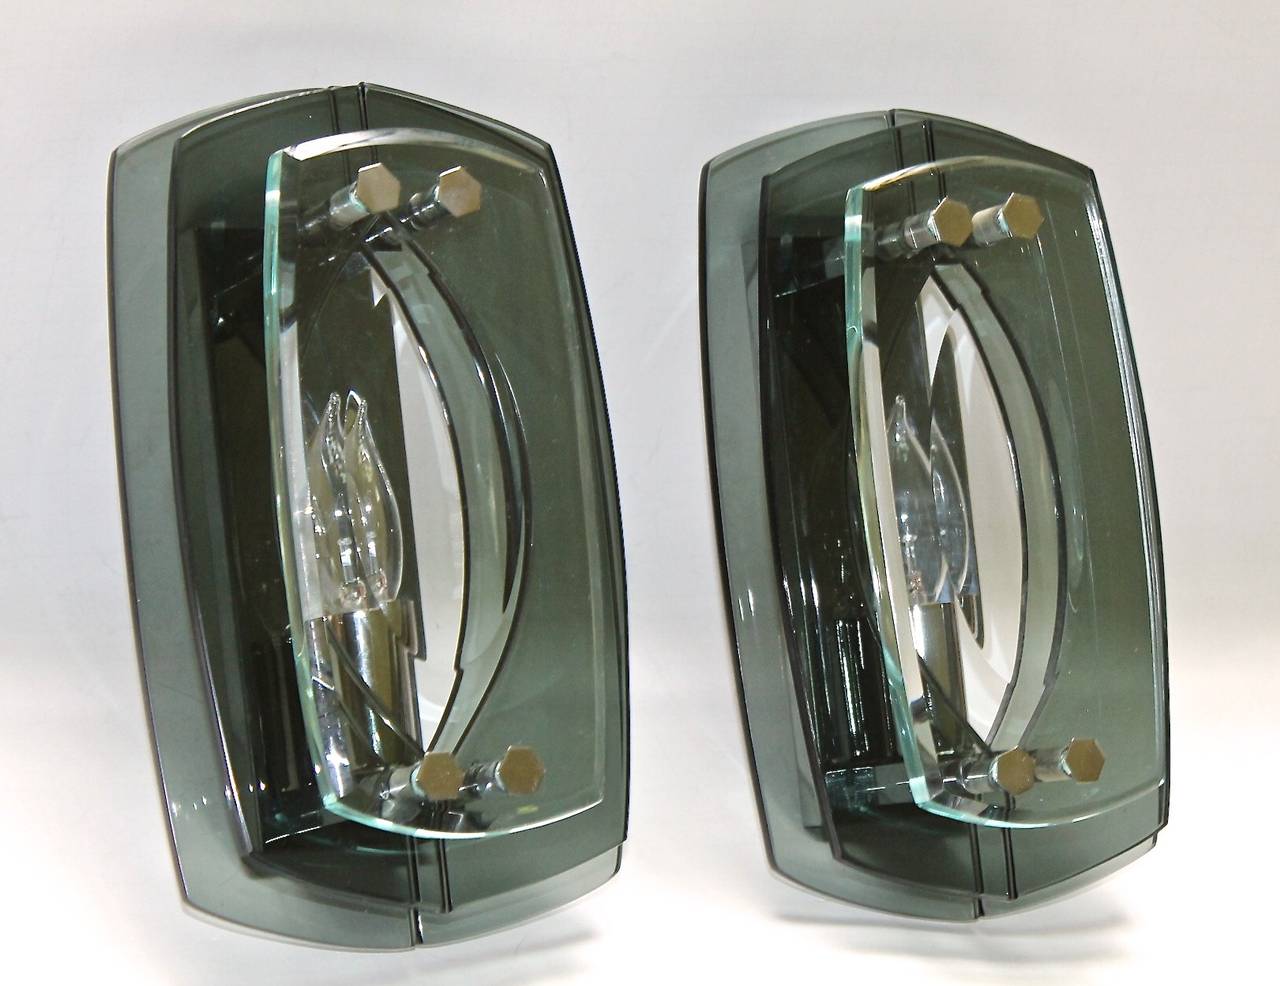 Pair of sconces in the style of Fontana Arte, translucent shades of greenish color glass with chrome-plated fittings, takes one 40-watt bulb, newly wired.